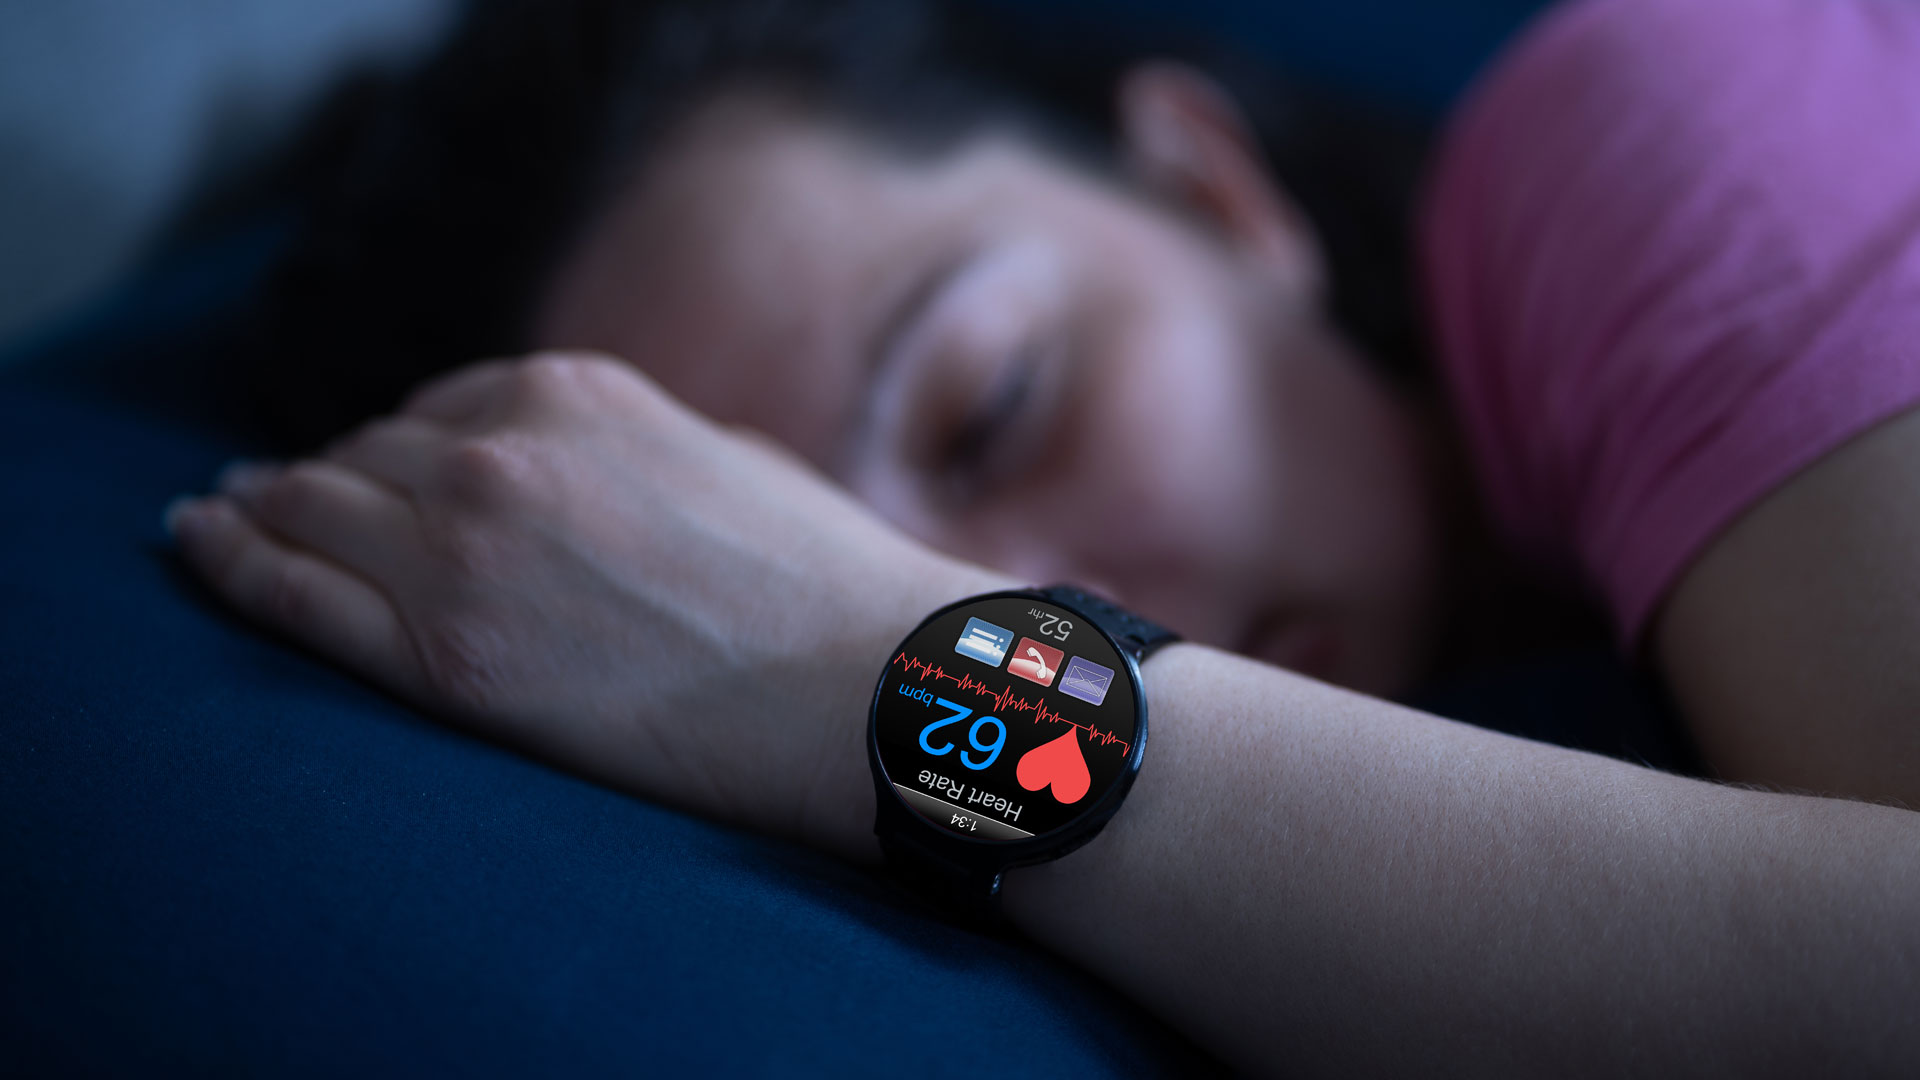 a person sleeping while wearing a smartwatch.